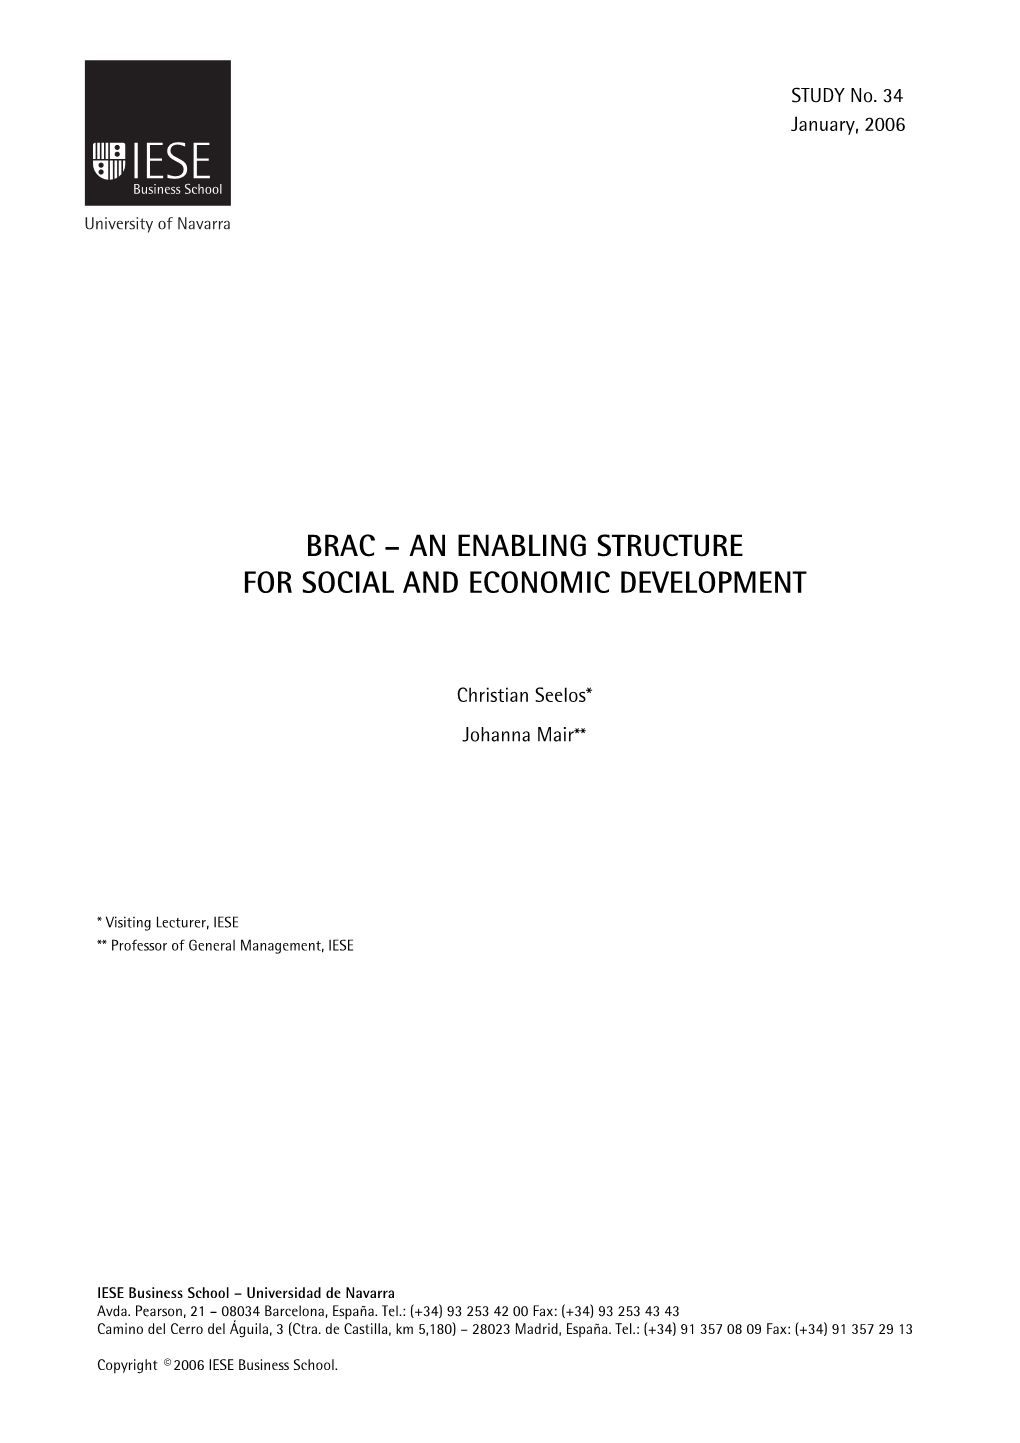 Brac – an Enabling Structure for Social and Economic Development